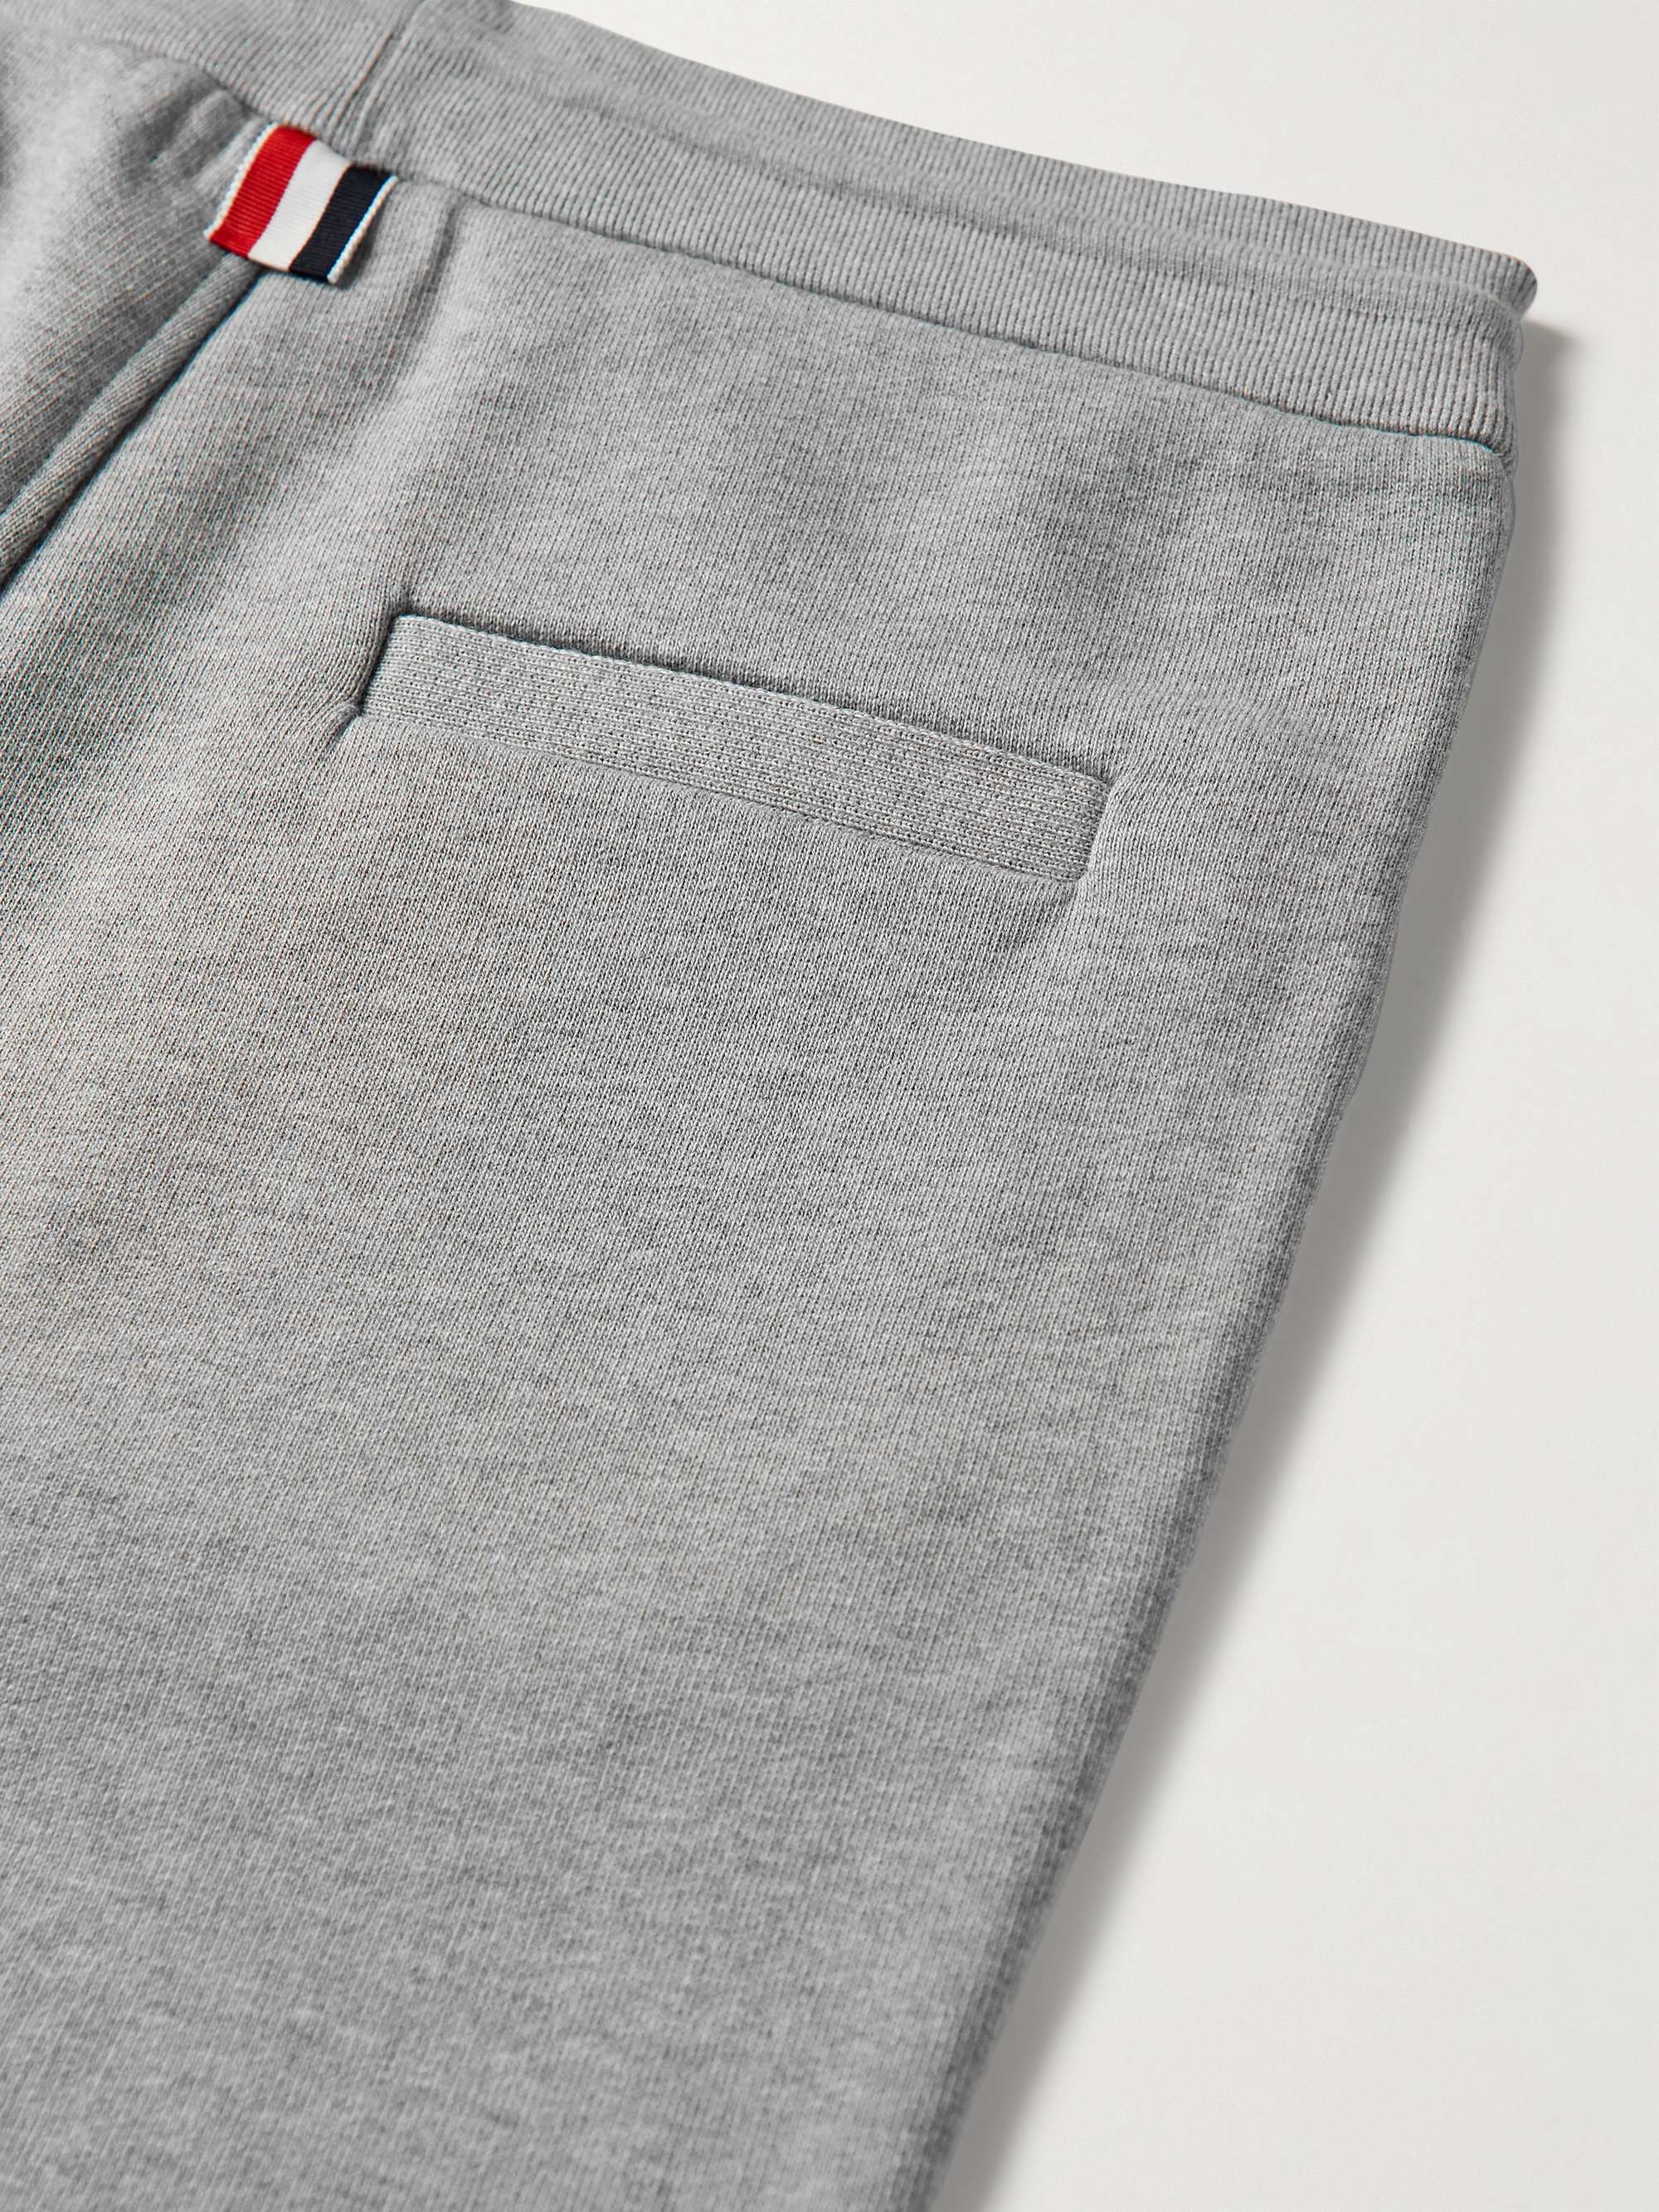 THOM BROWNE Tapered Grosgrain-Trimmed Cotton-Jersey Sweatpants